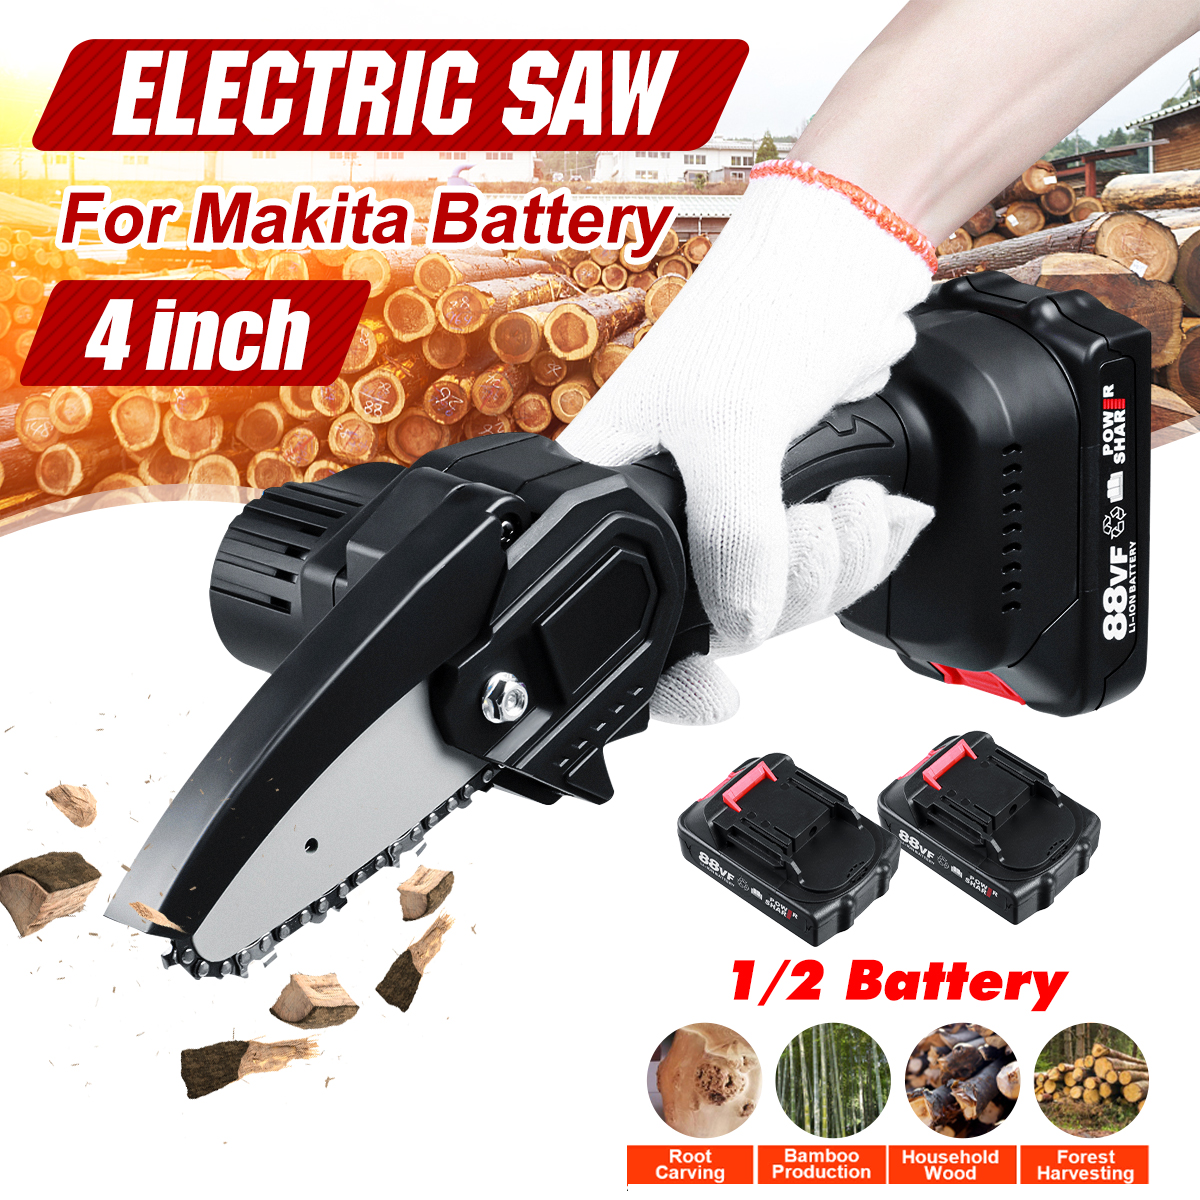 21V-Cordless-Electric-Chainsaw-Chain-Saw-Handheld-Garden-Wood-Cutting-Tool-with-Battery-Adapted-To-M-1816551-1